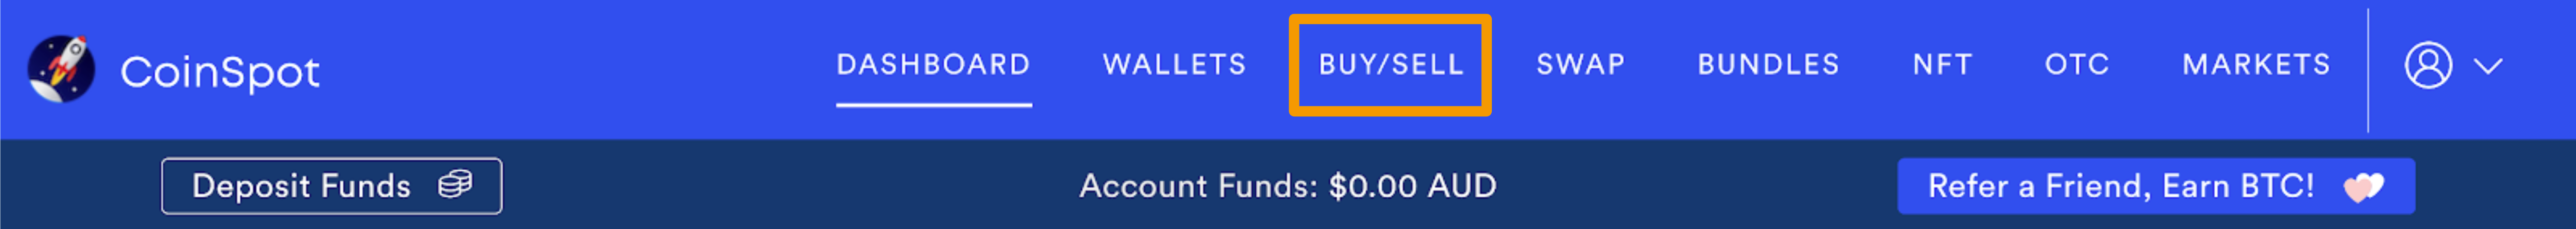 CoinSpot_Buy_and_Sell_v2.png